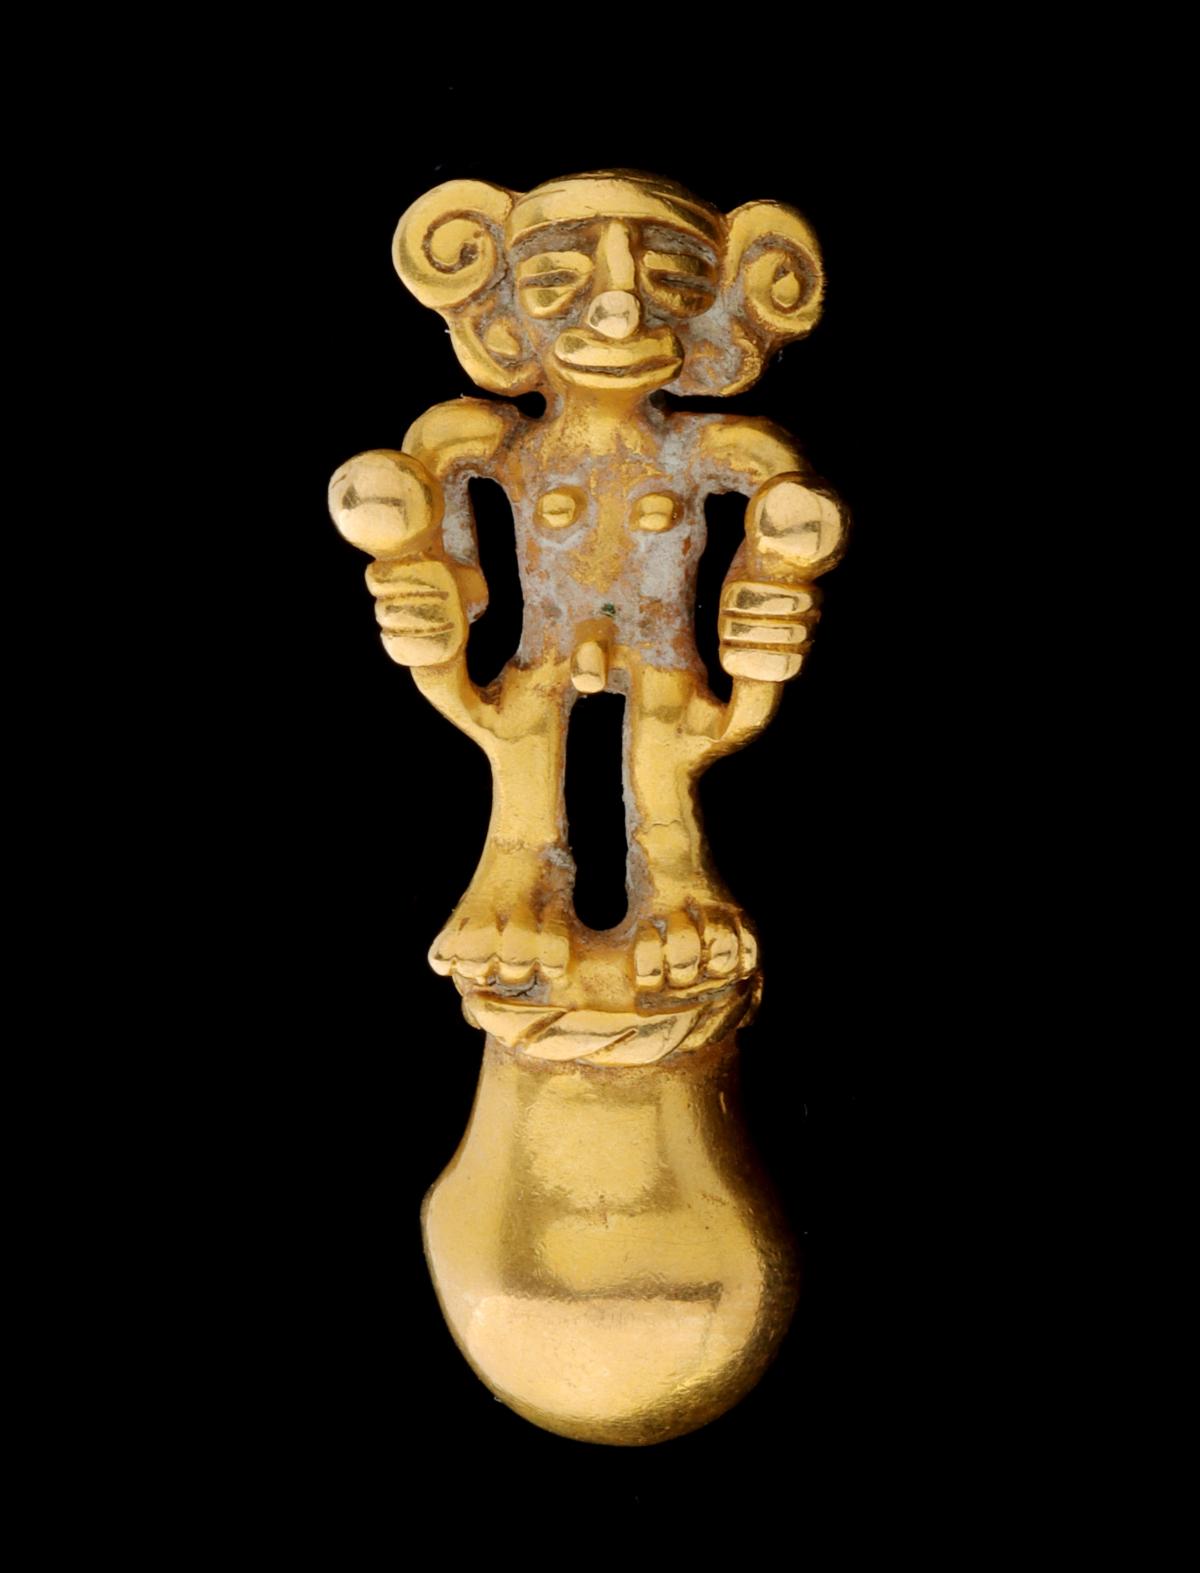 A PRE-COLUMBIAN STYLE 14K GOLD FIGURAL BELL PENDANT